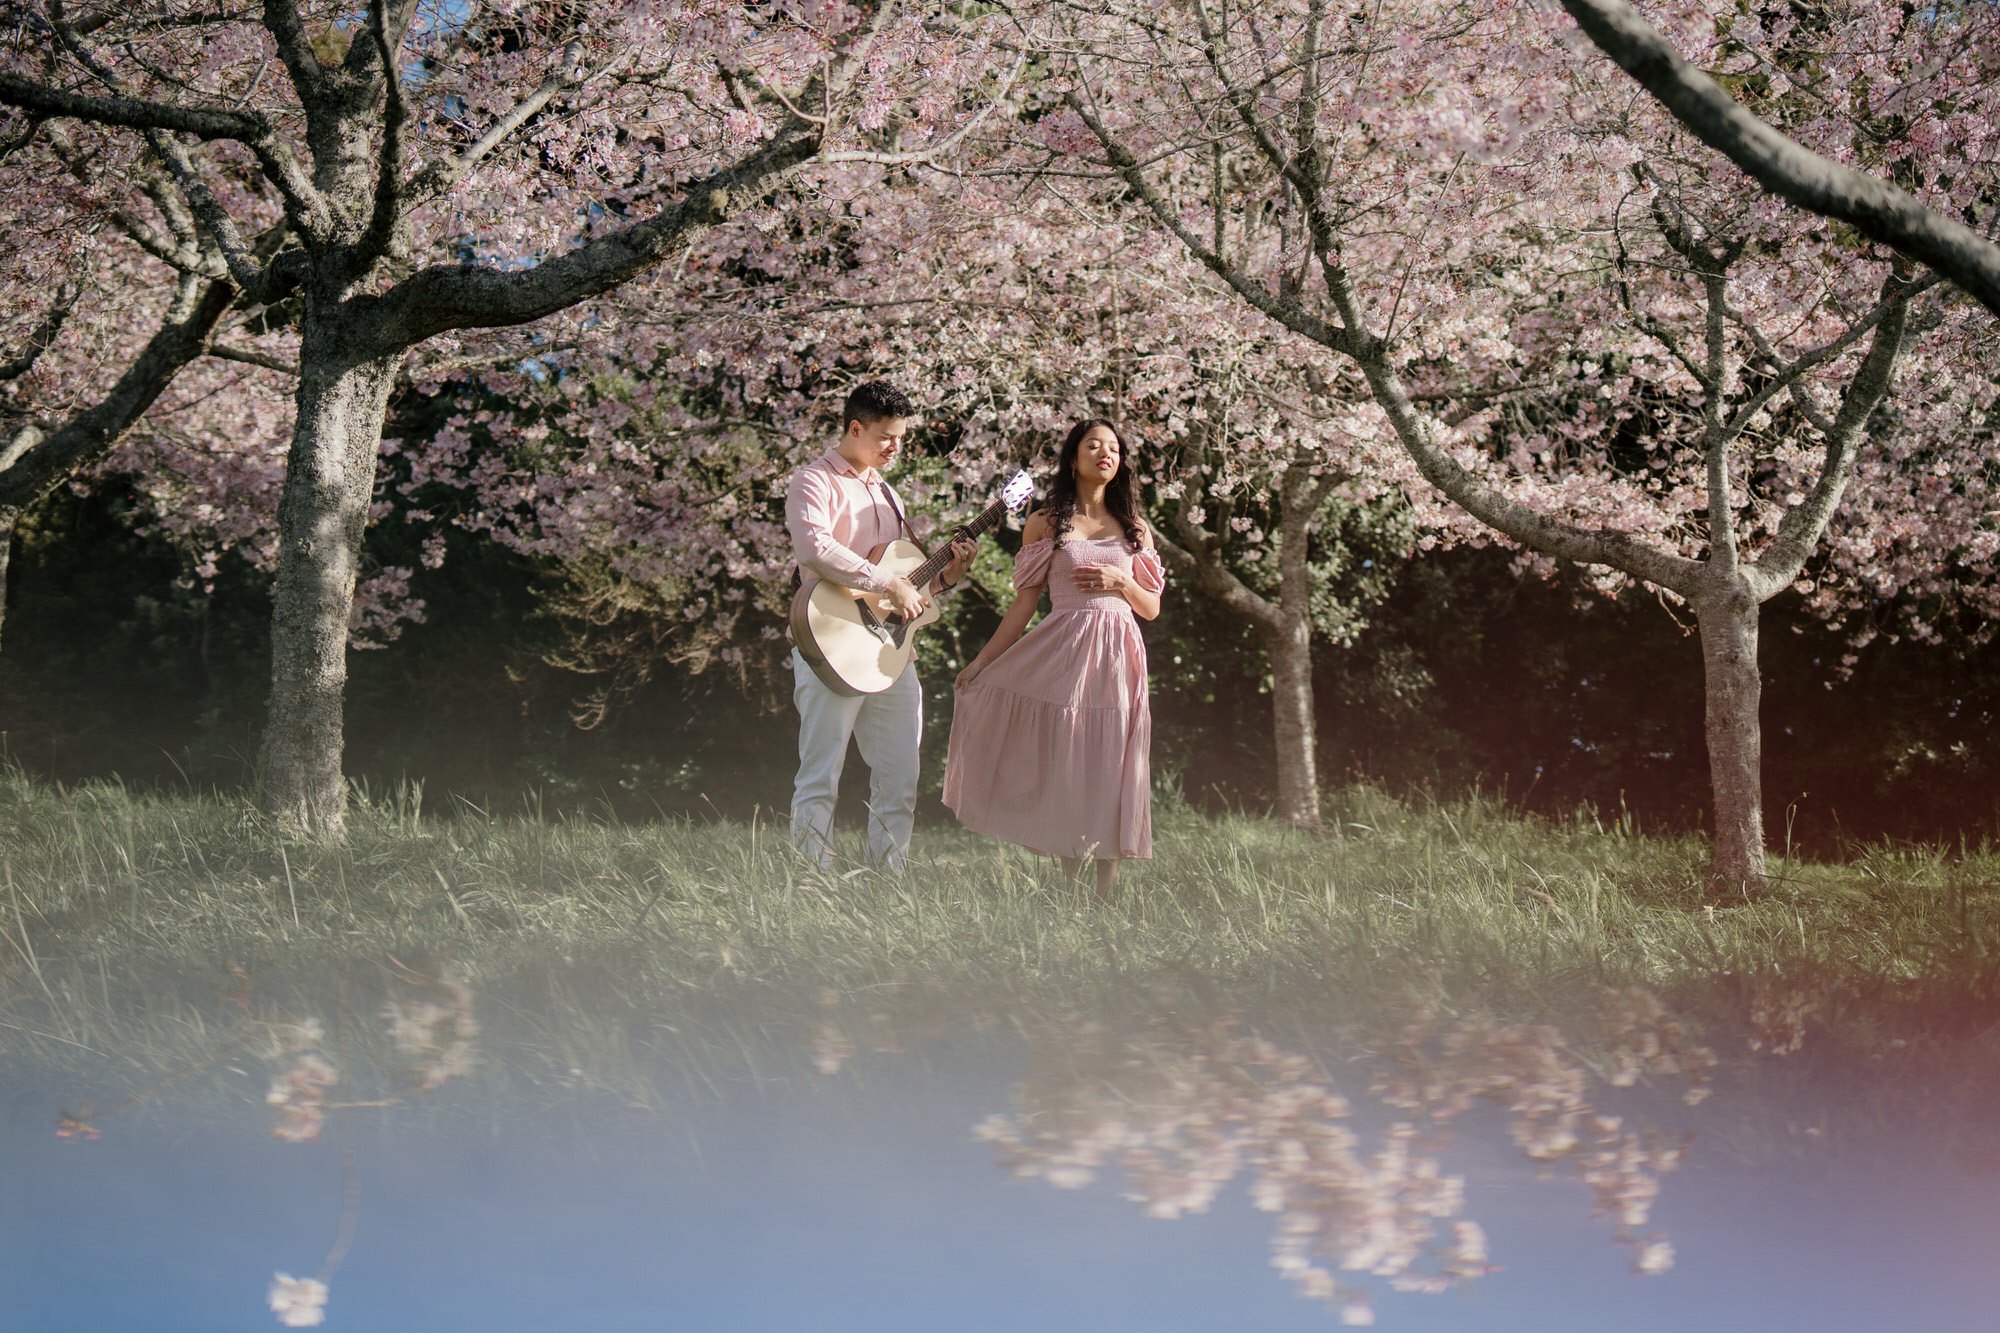 nate-and-thea-singers-duo-2023-top-auckland-wedding-phtographer-photography-videography-film-new-zealand-NZ-best-band-cherry-blossom-botanical-garden-engagement-elopement-dear-white-productions (5).jpg